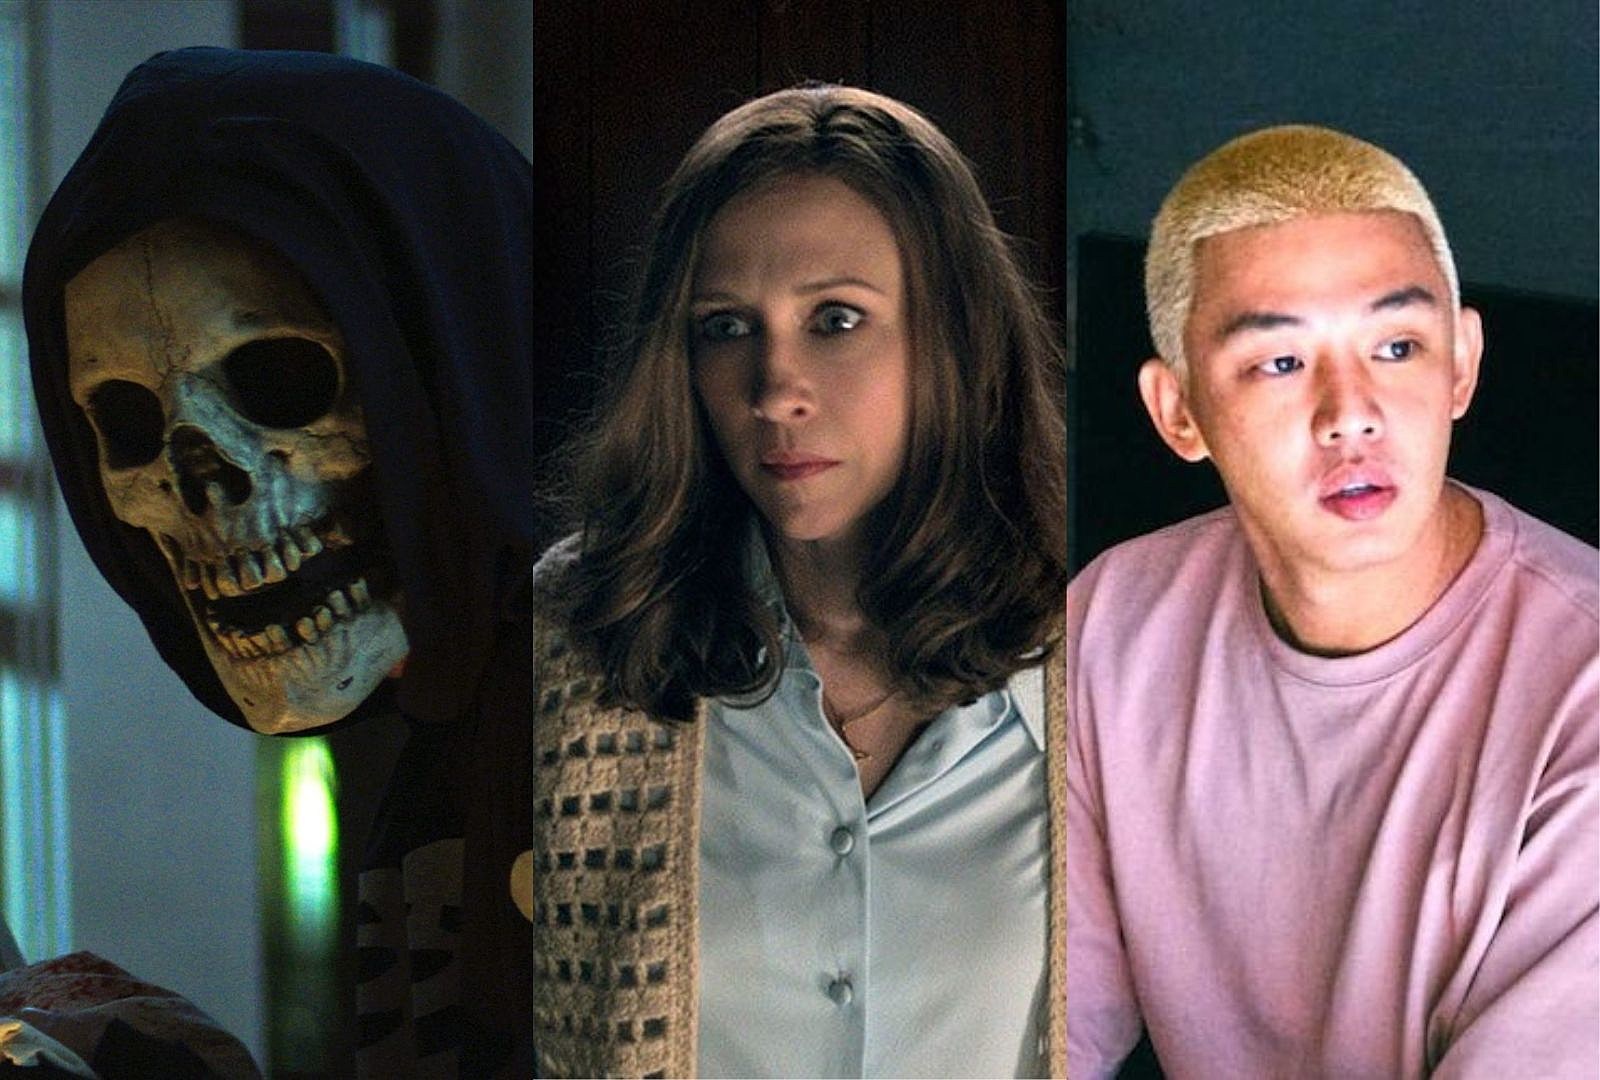 The 16 Scariest Movies and TV Shows to watch on Netflix - Netflix Tudum